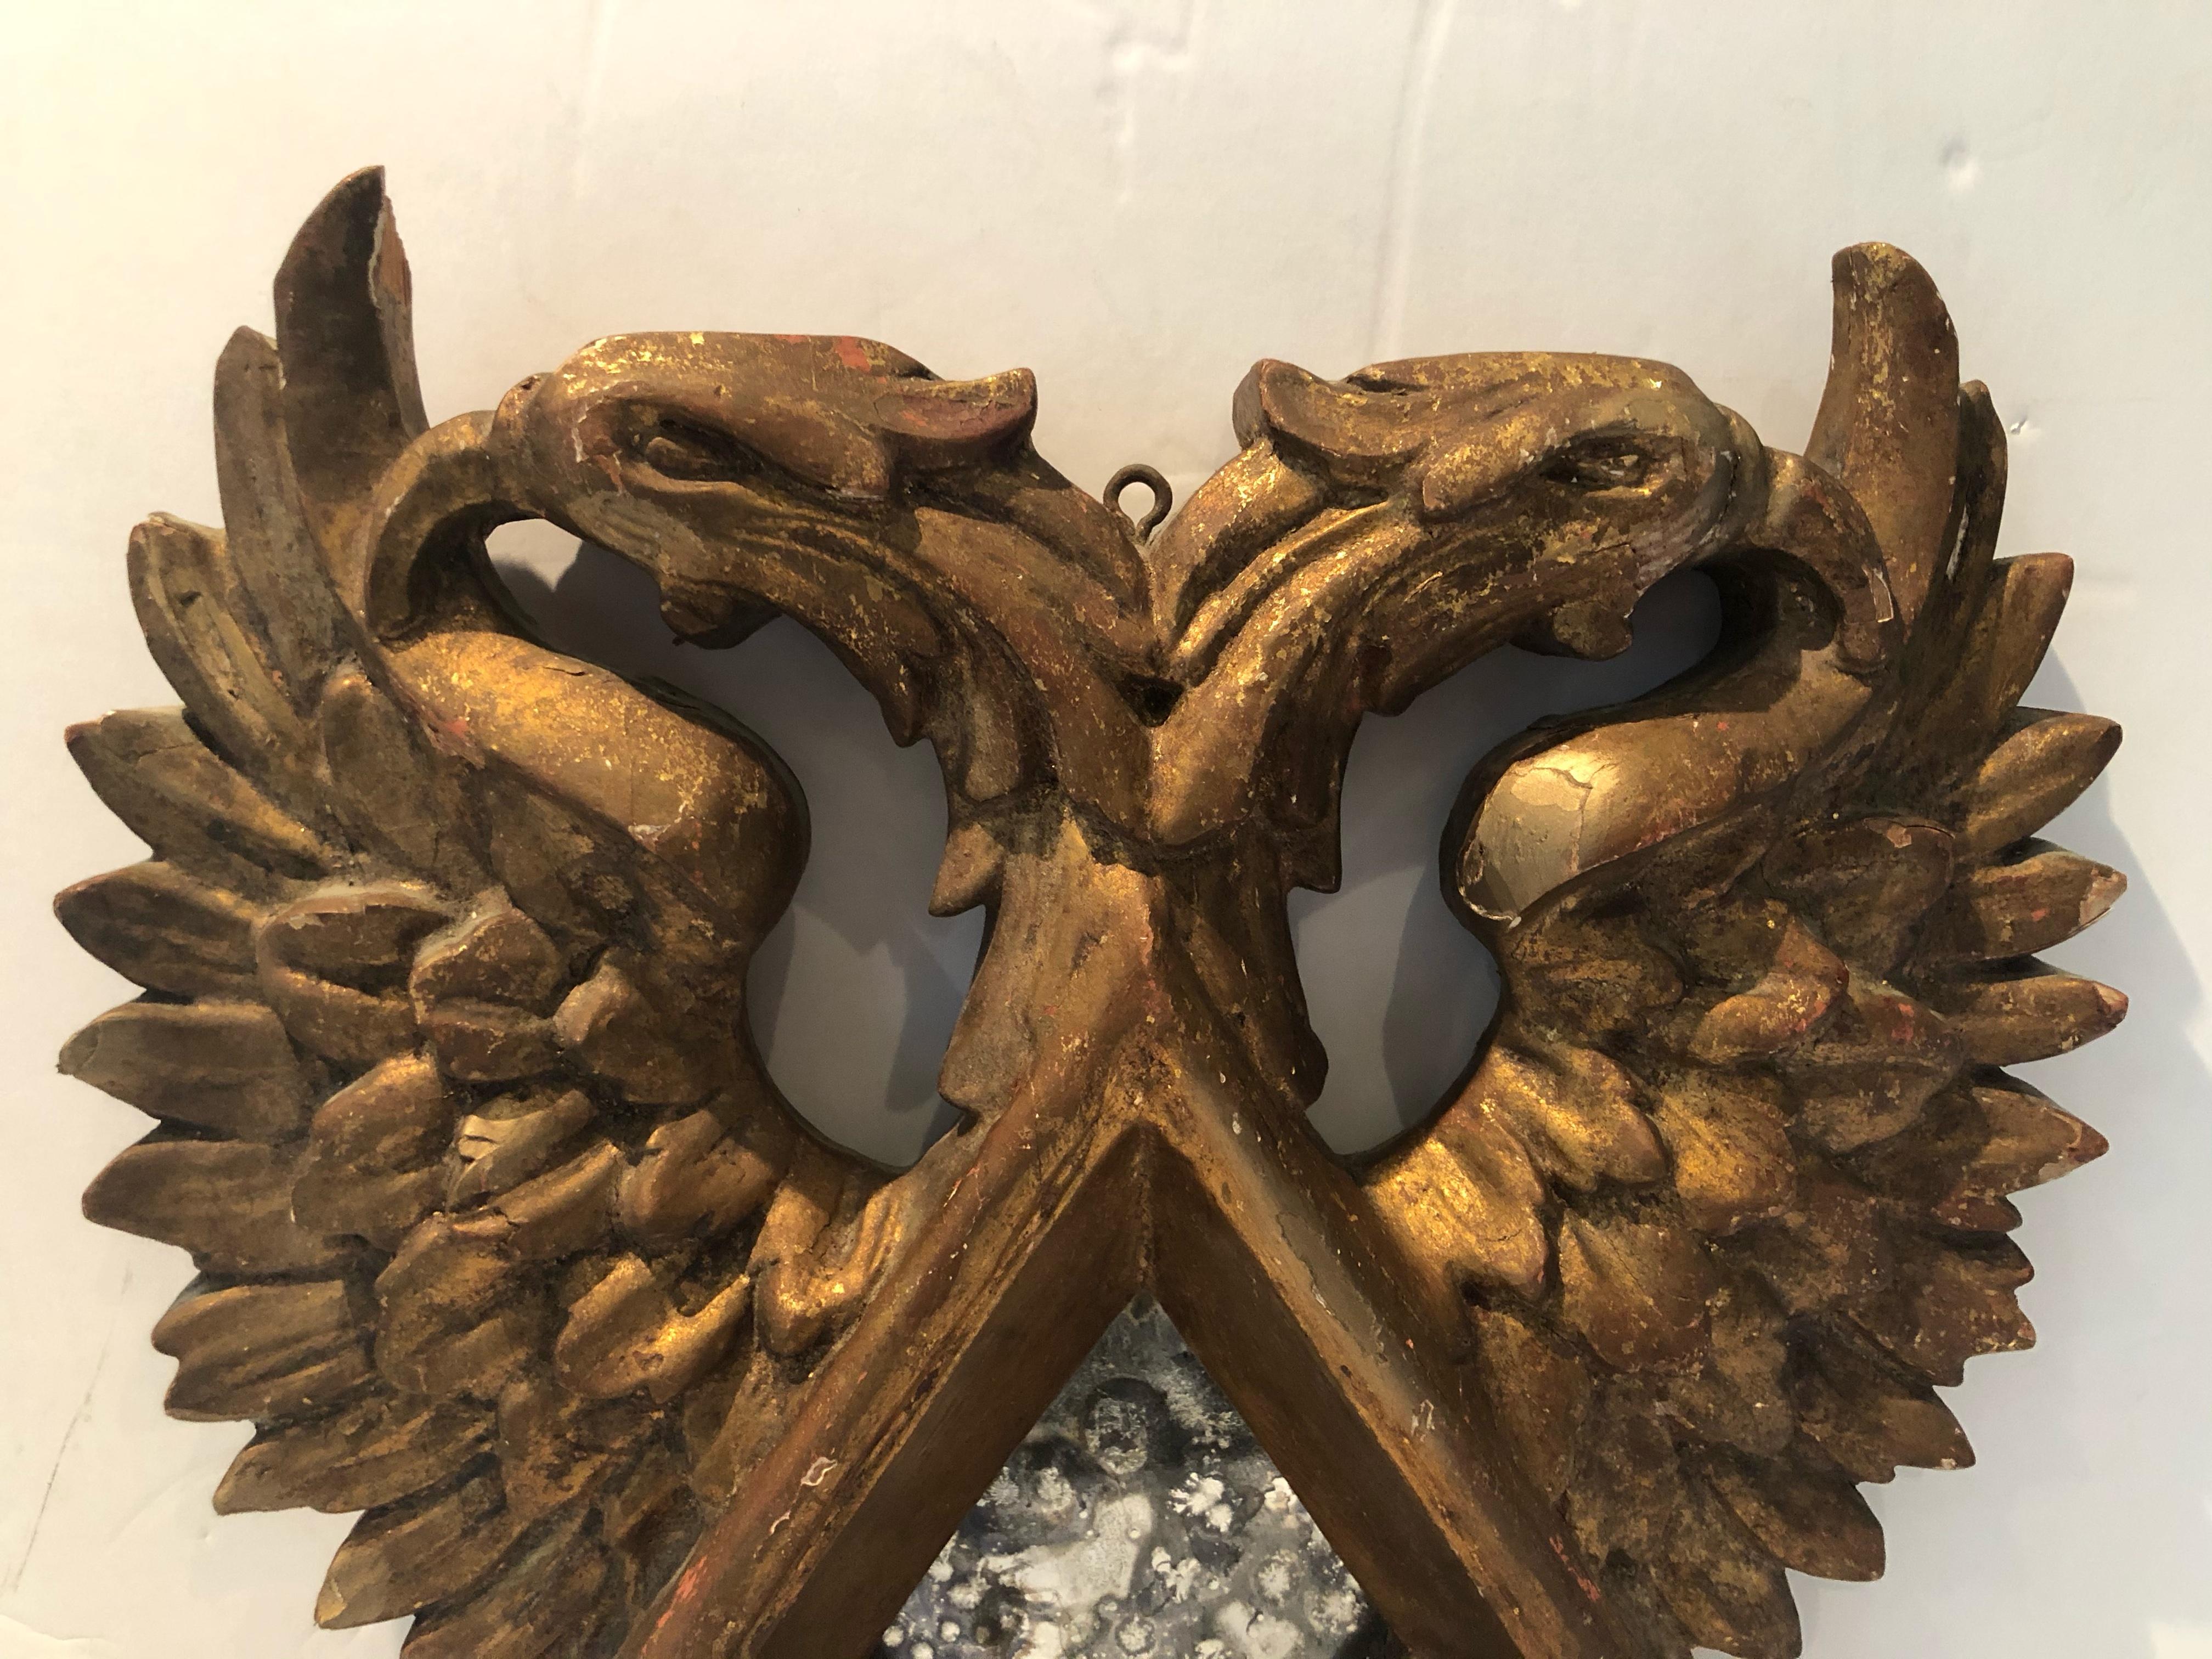 A very unique vintage giltwood mirror having an antiqued glass diamond shaped mirror in the center. The hand carving of this mirror is very detailed as can be seen in the wings and feet of the griffins. Griffins are mythological creatures having the